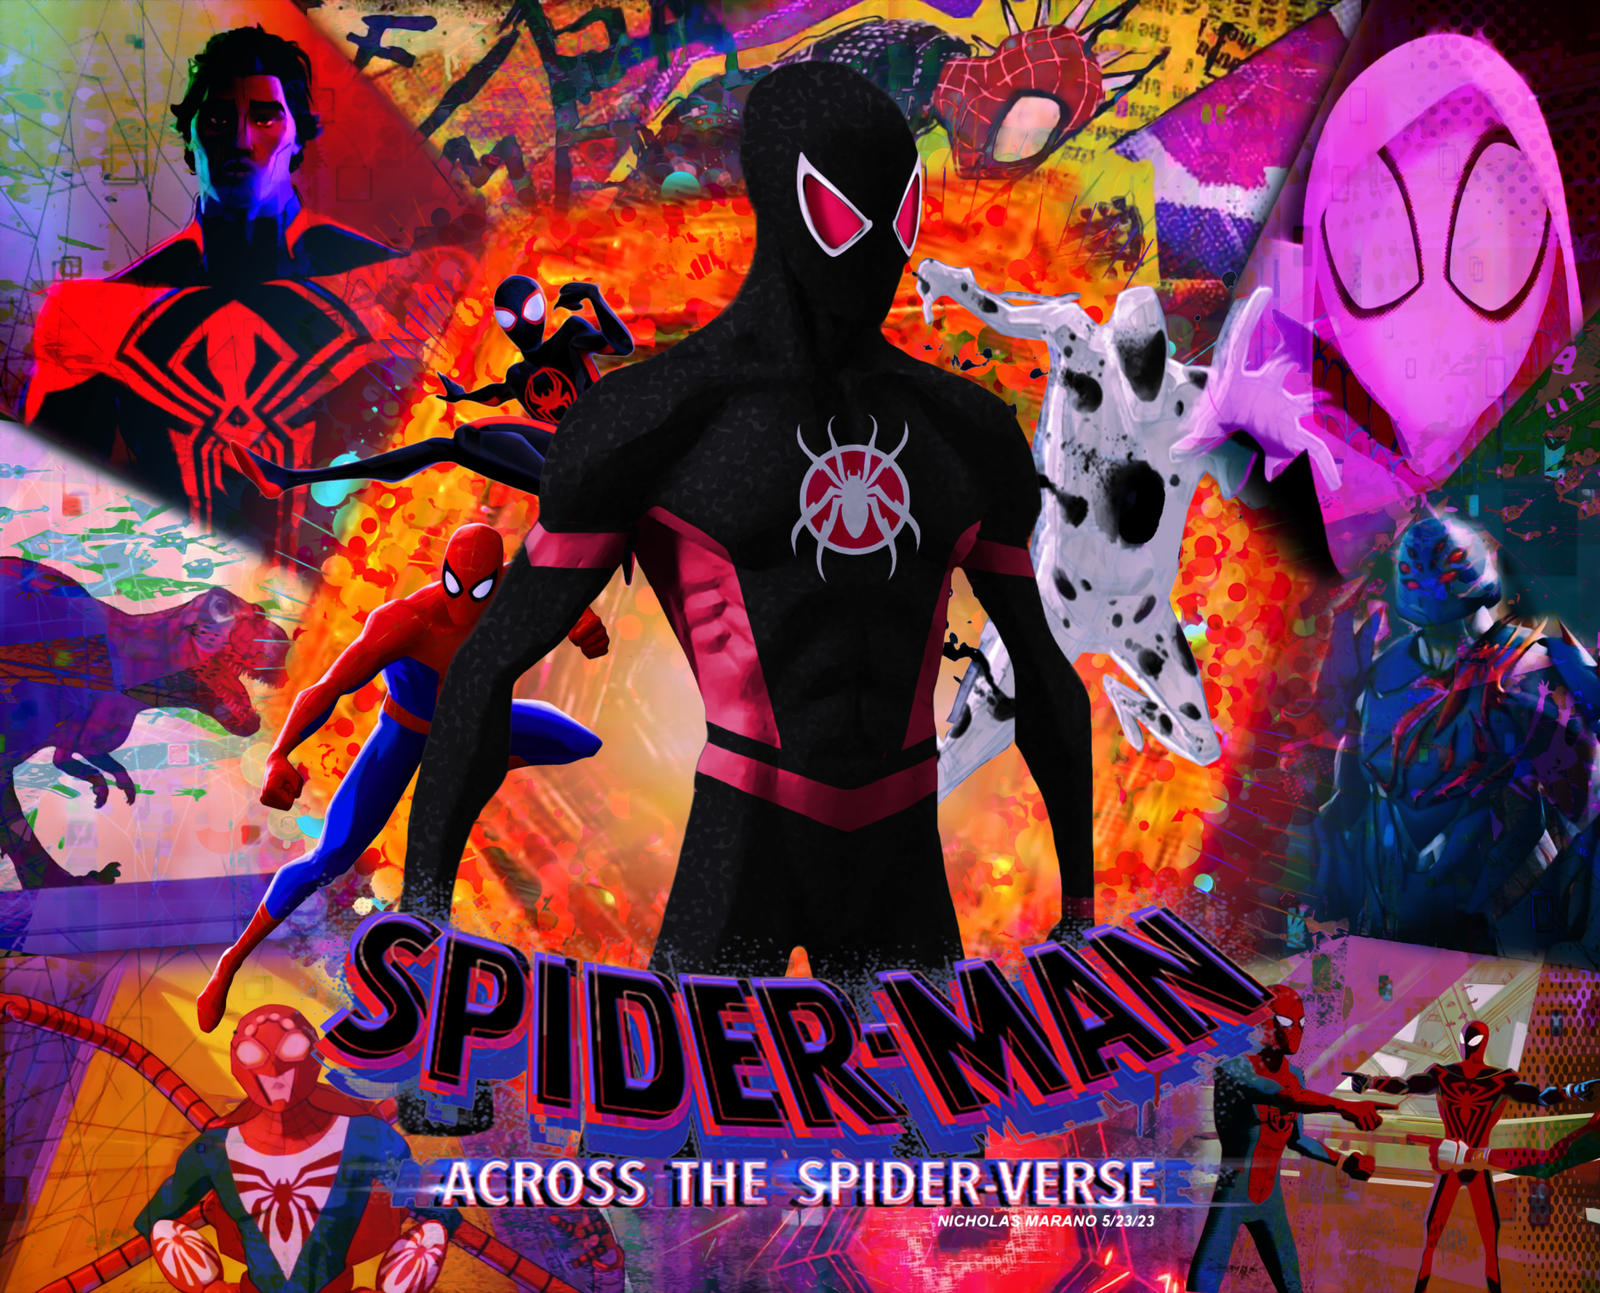 Spider-Man: Across the Spider-Verse release date delayed - GoldDerby